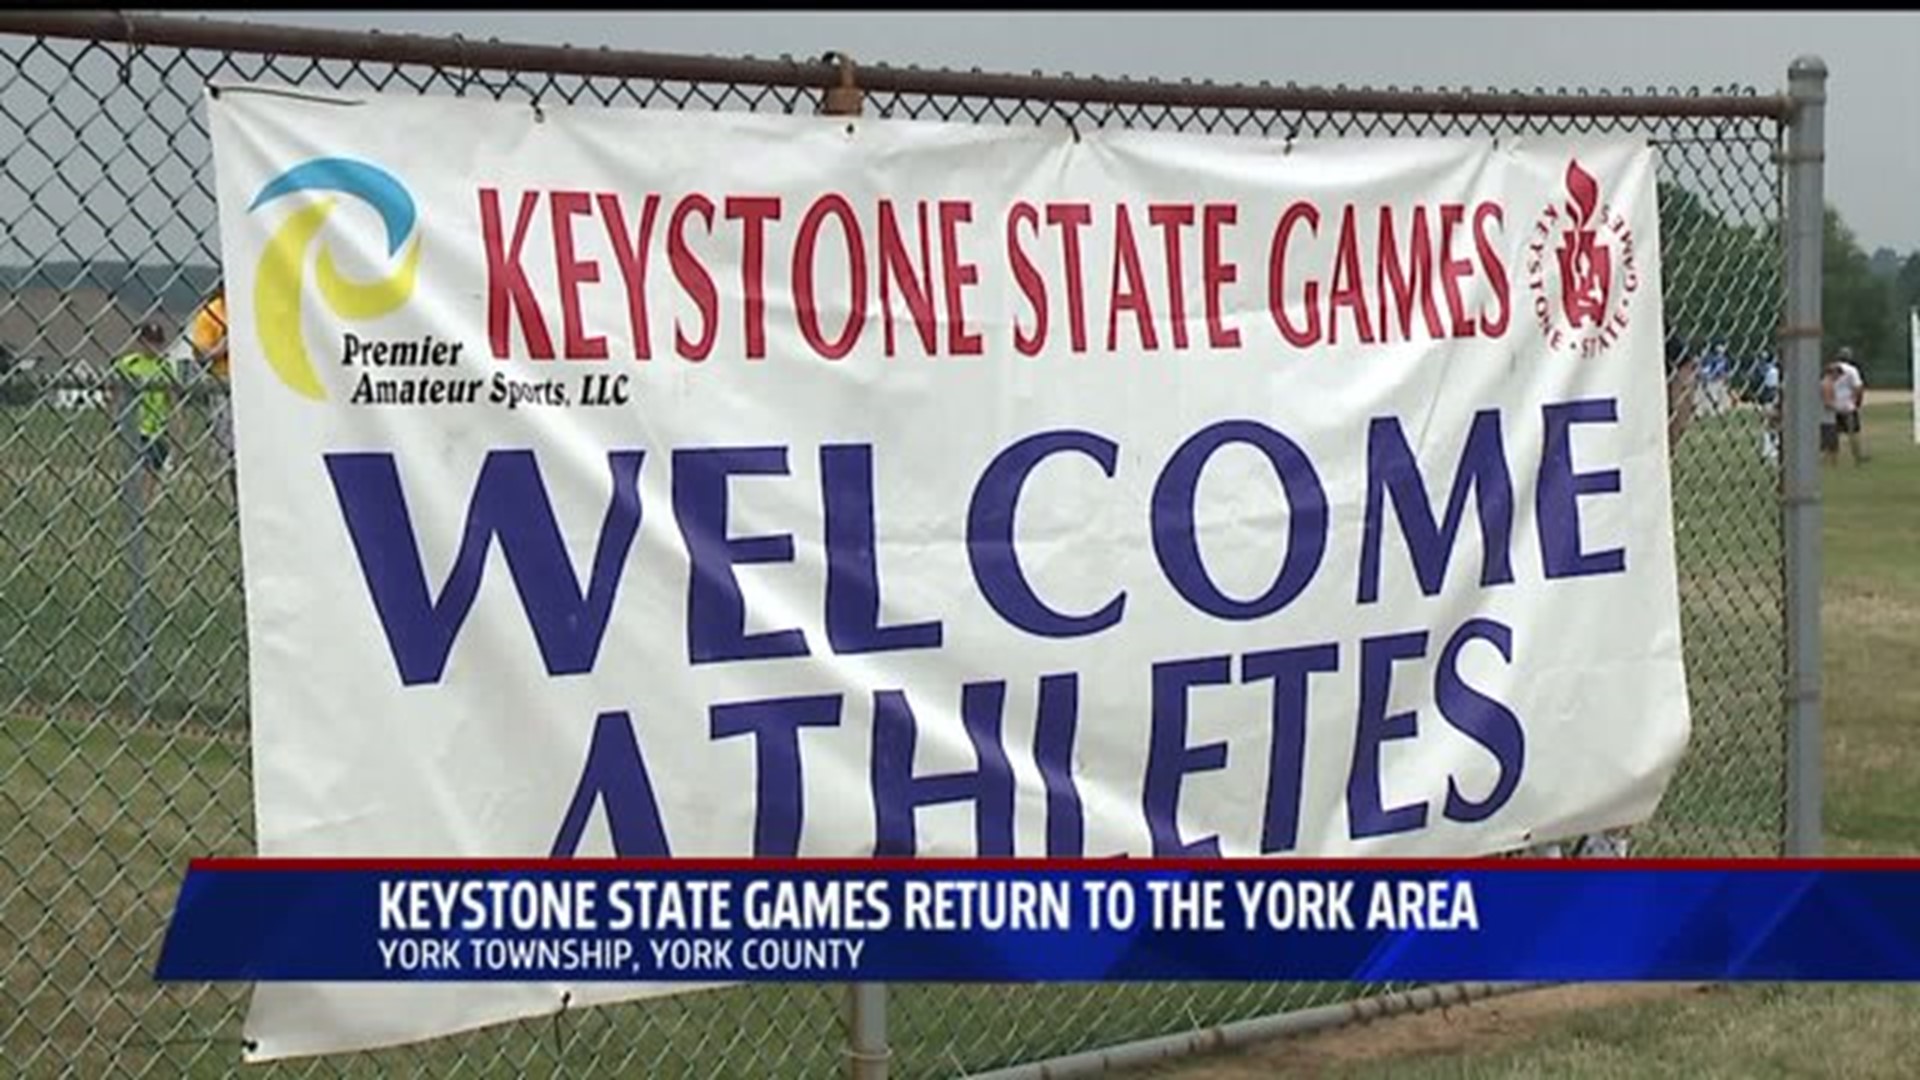 Keystone State Games means gold for local economy